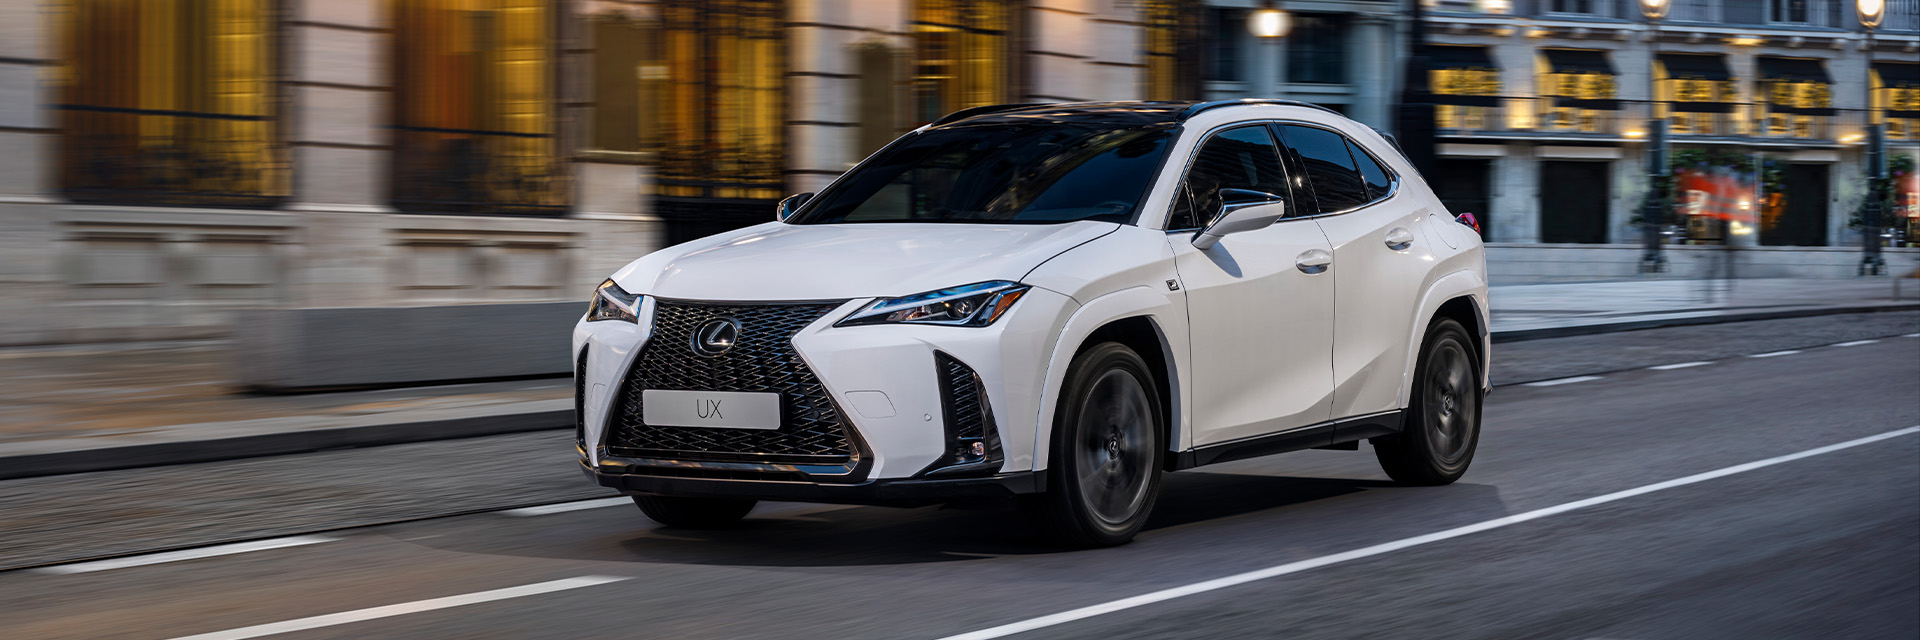 Lexus UX driving on a road